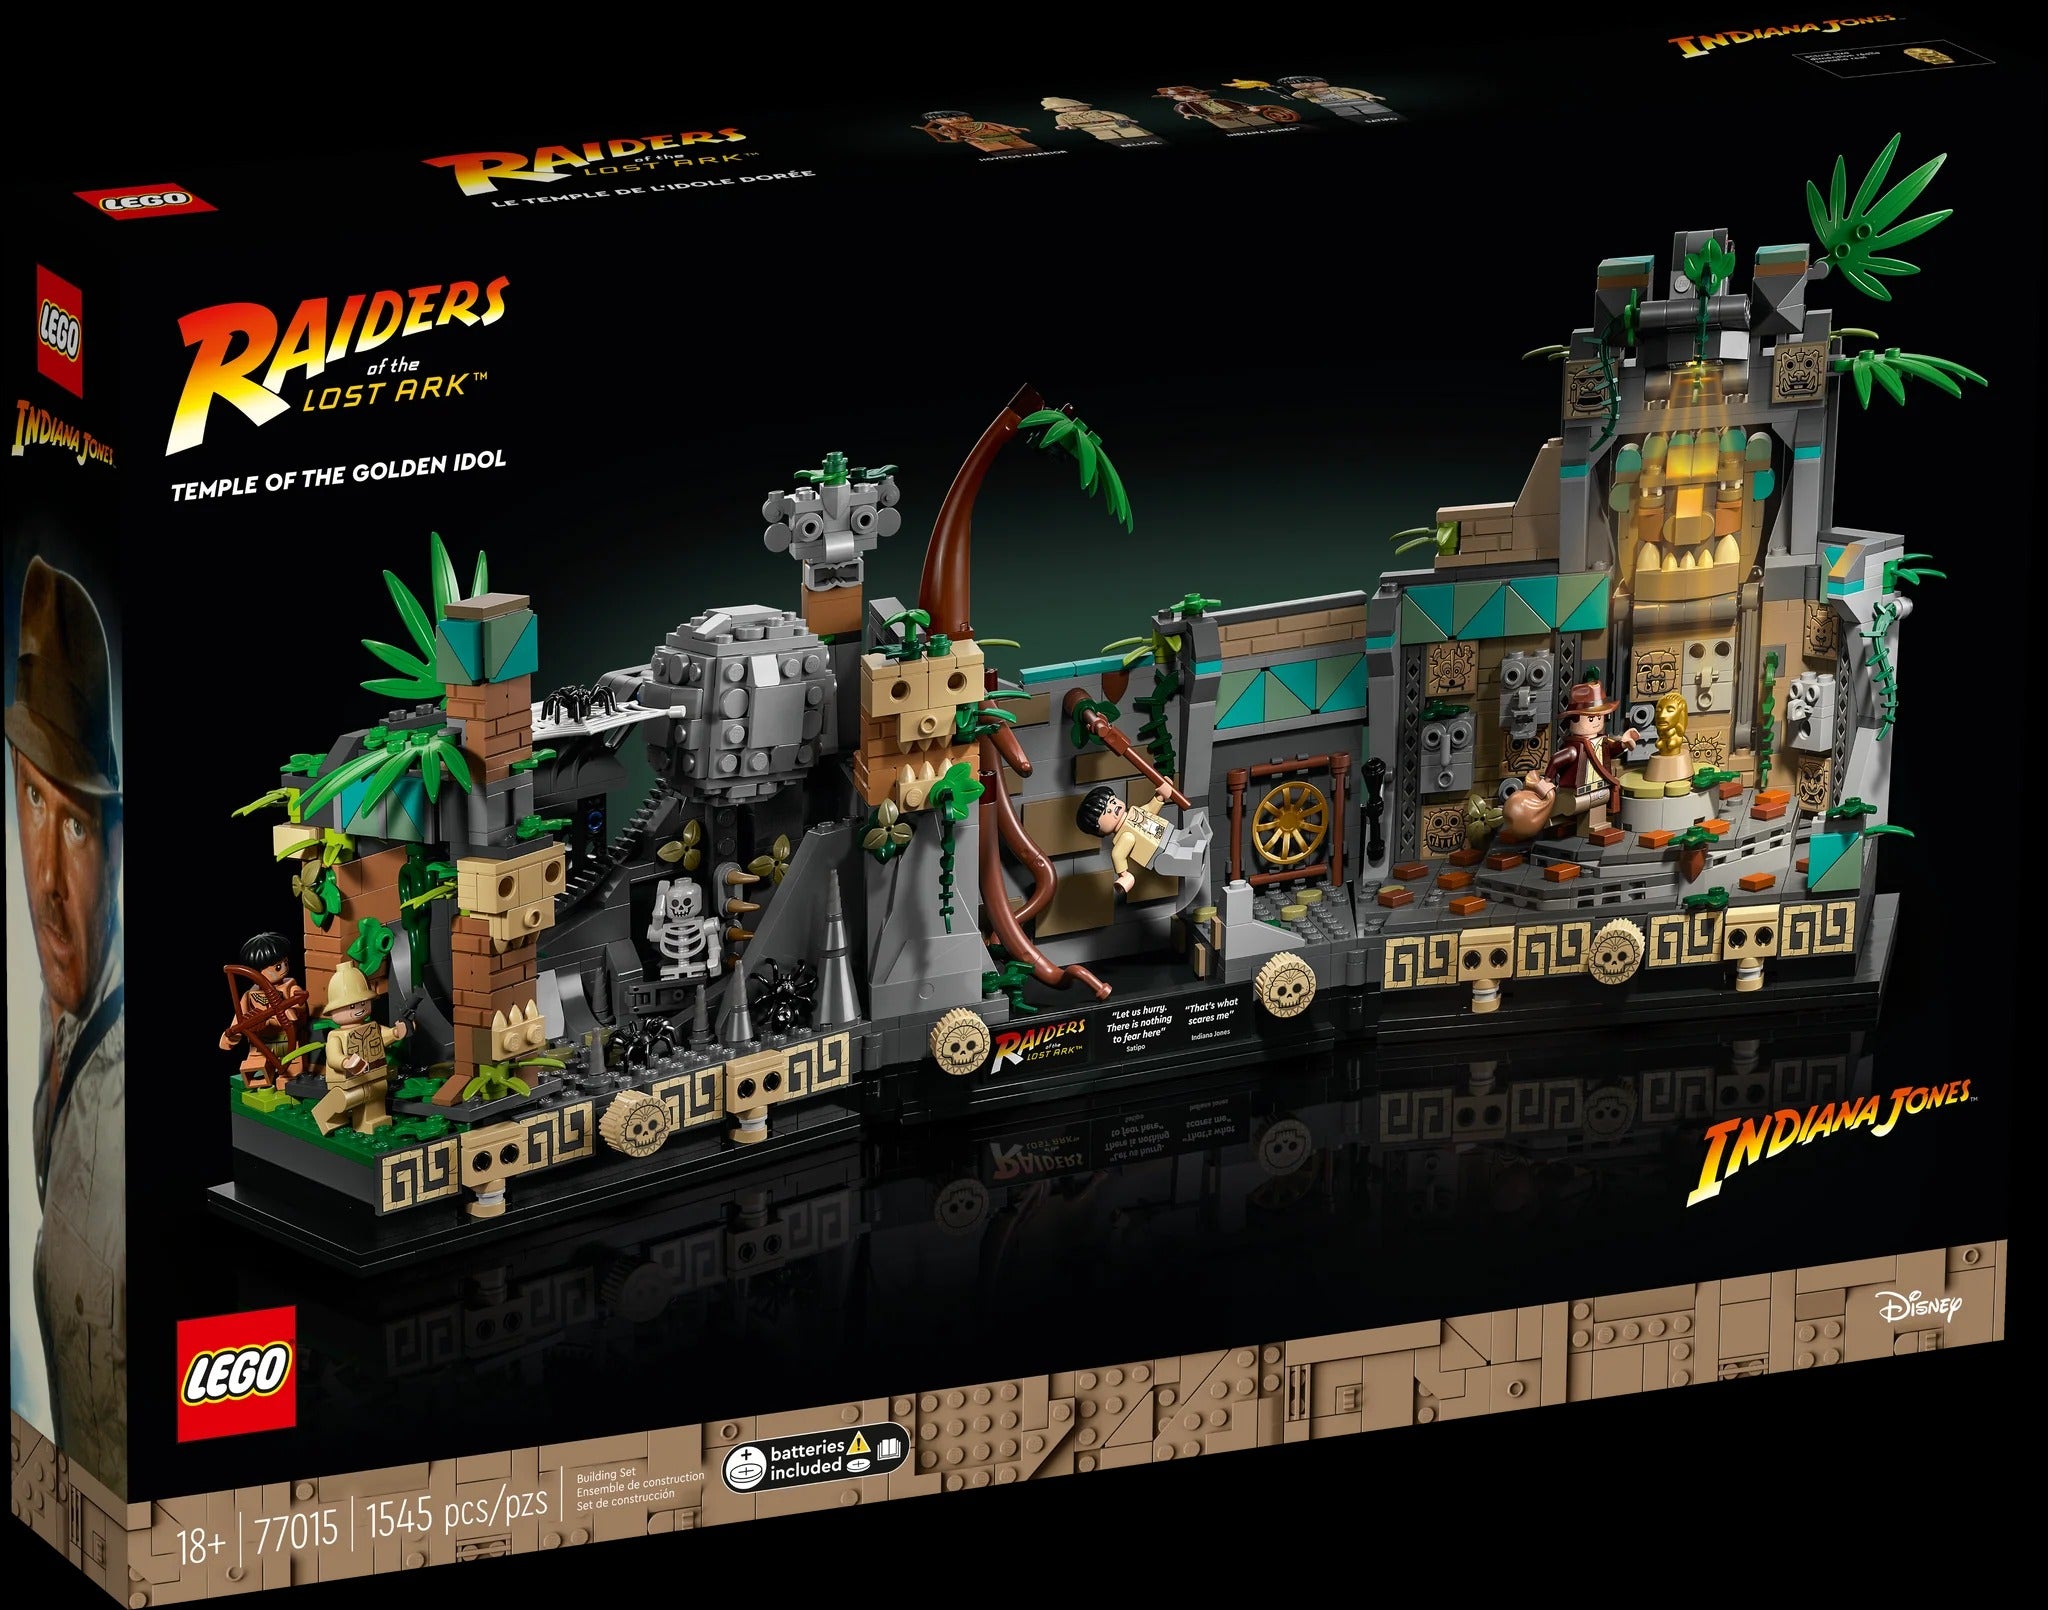 Lego: Indiana Jones and the Raiders of the Lost Ark - Temple of the Golden Idol (77015)